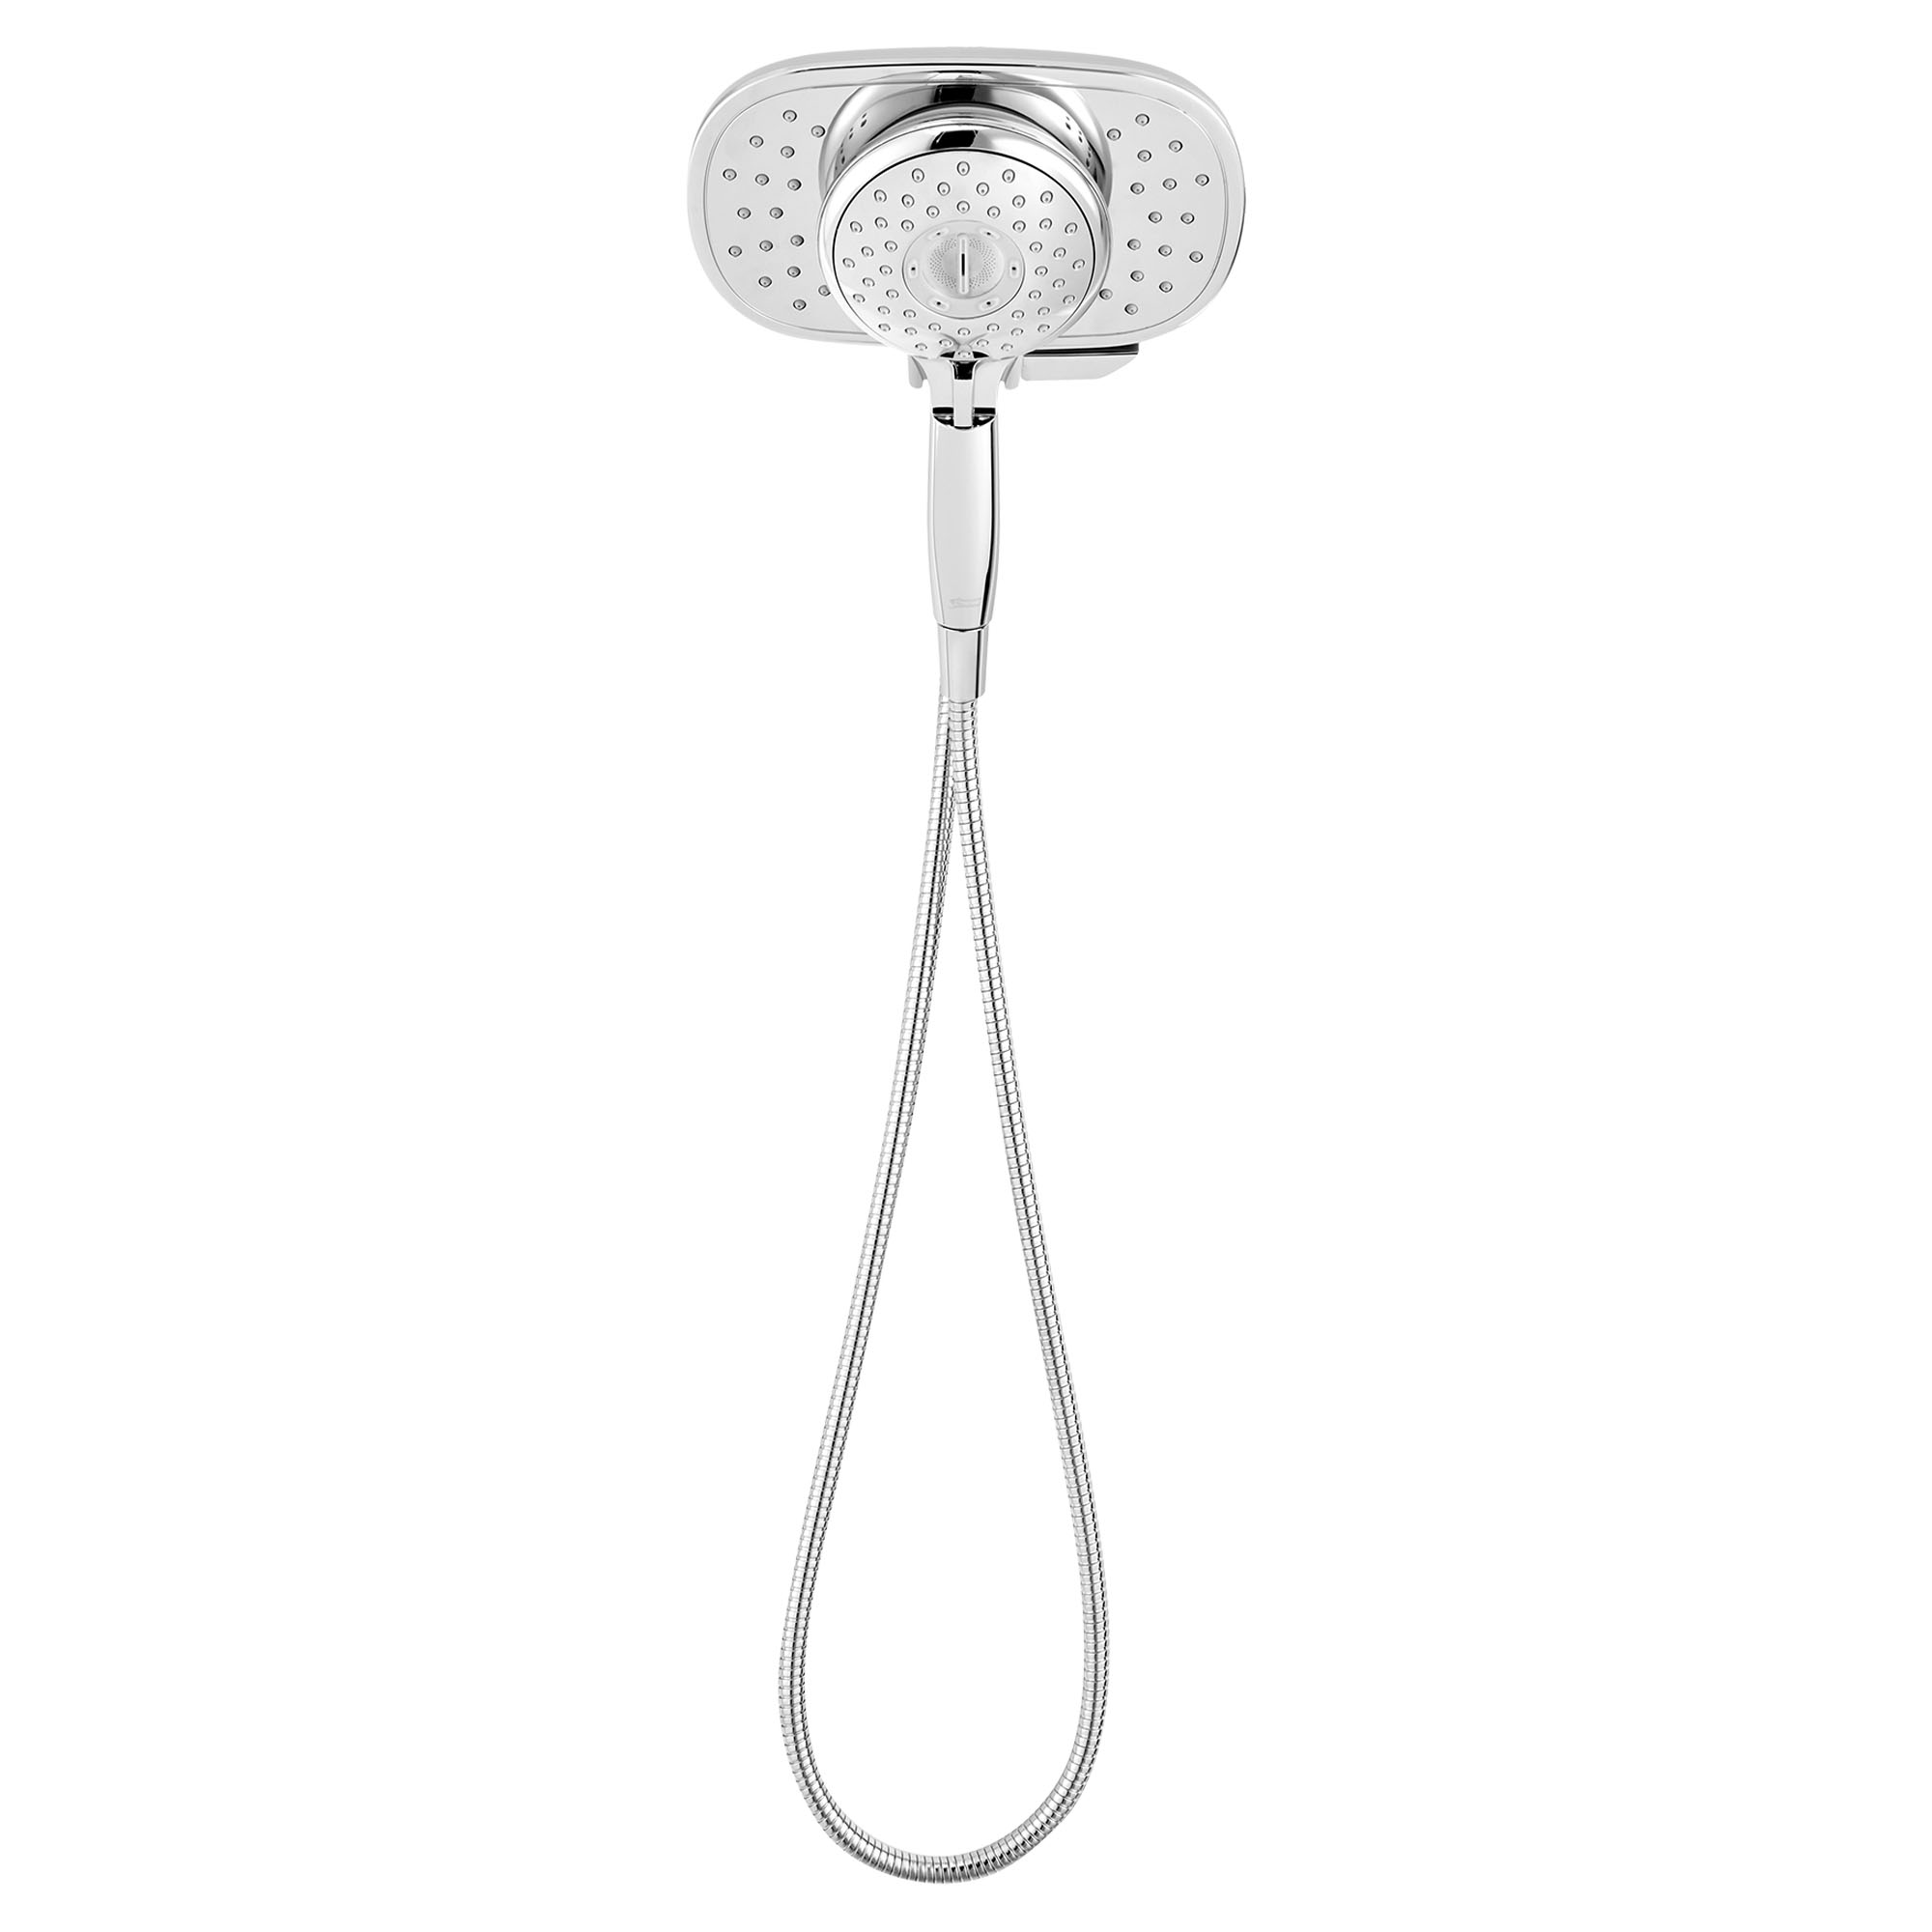 Spectra® Duo 2-in-1 Hand Shower 1.8 gpm/6.8 L/min